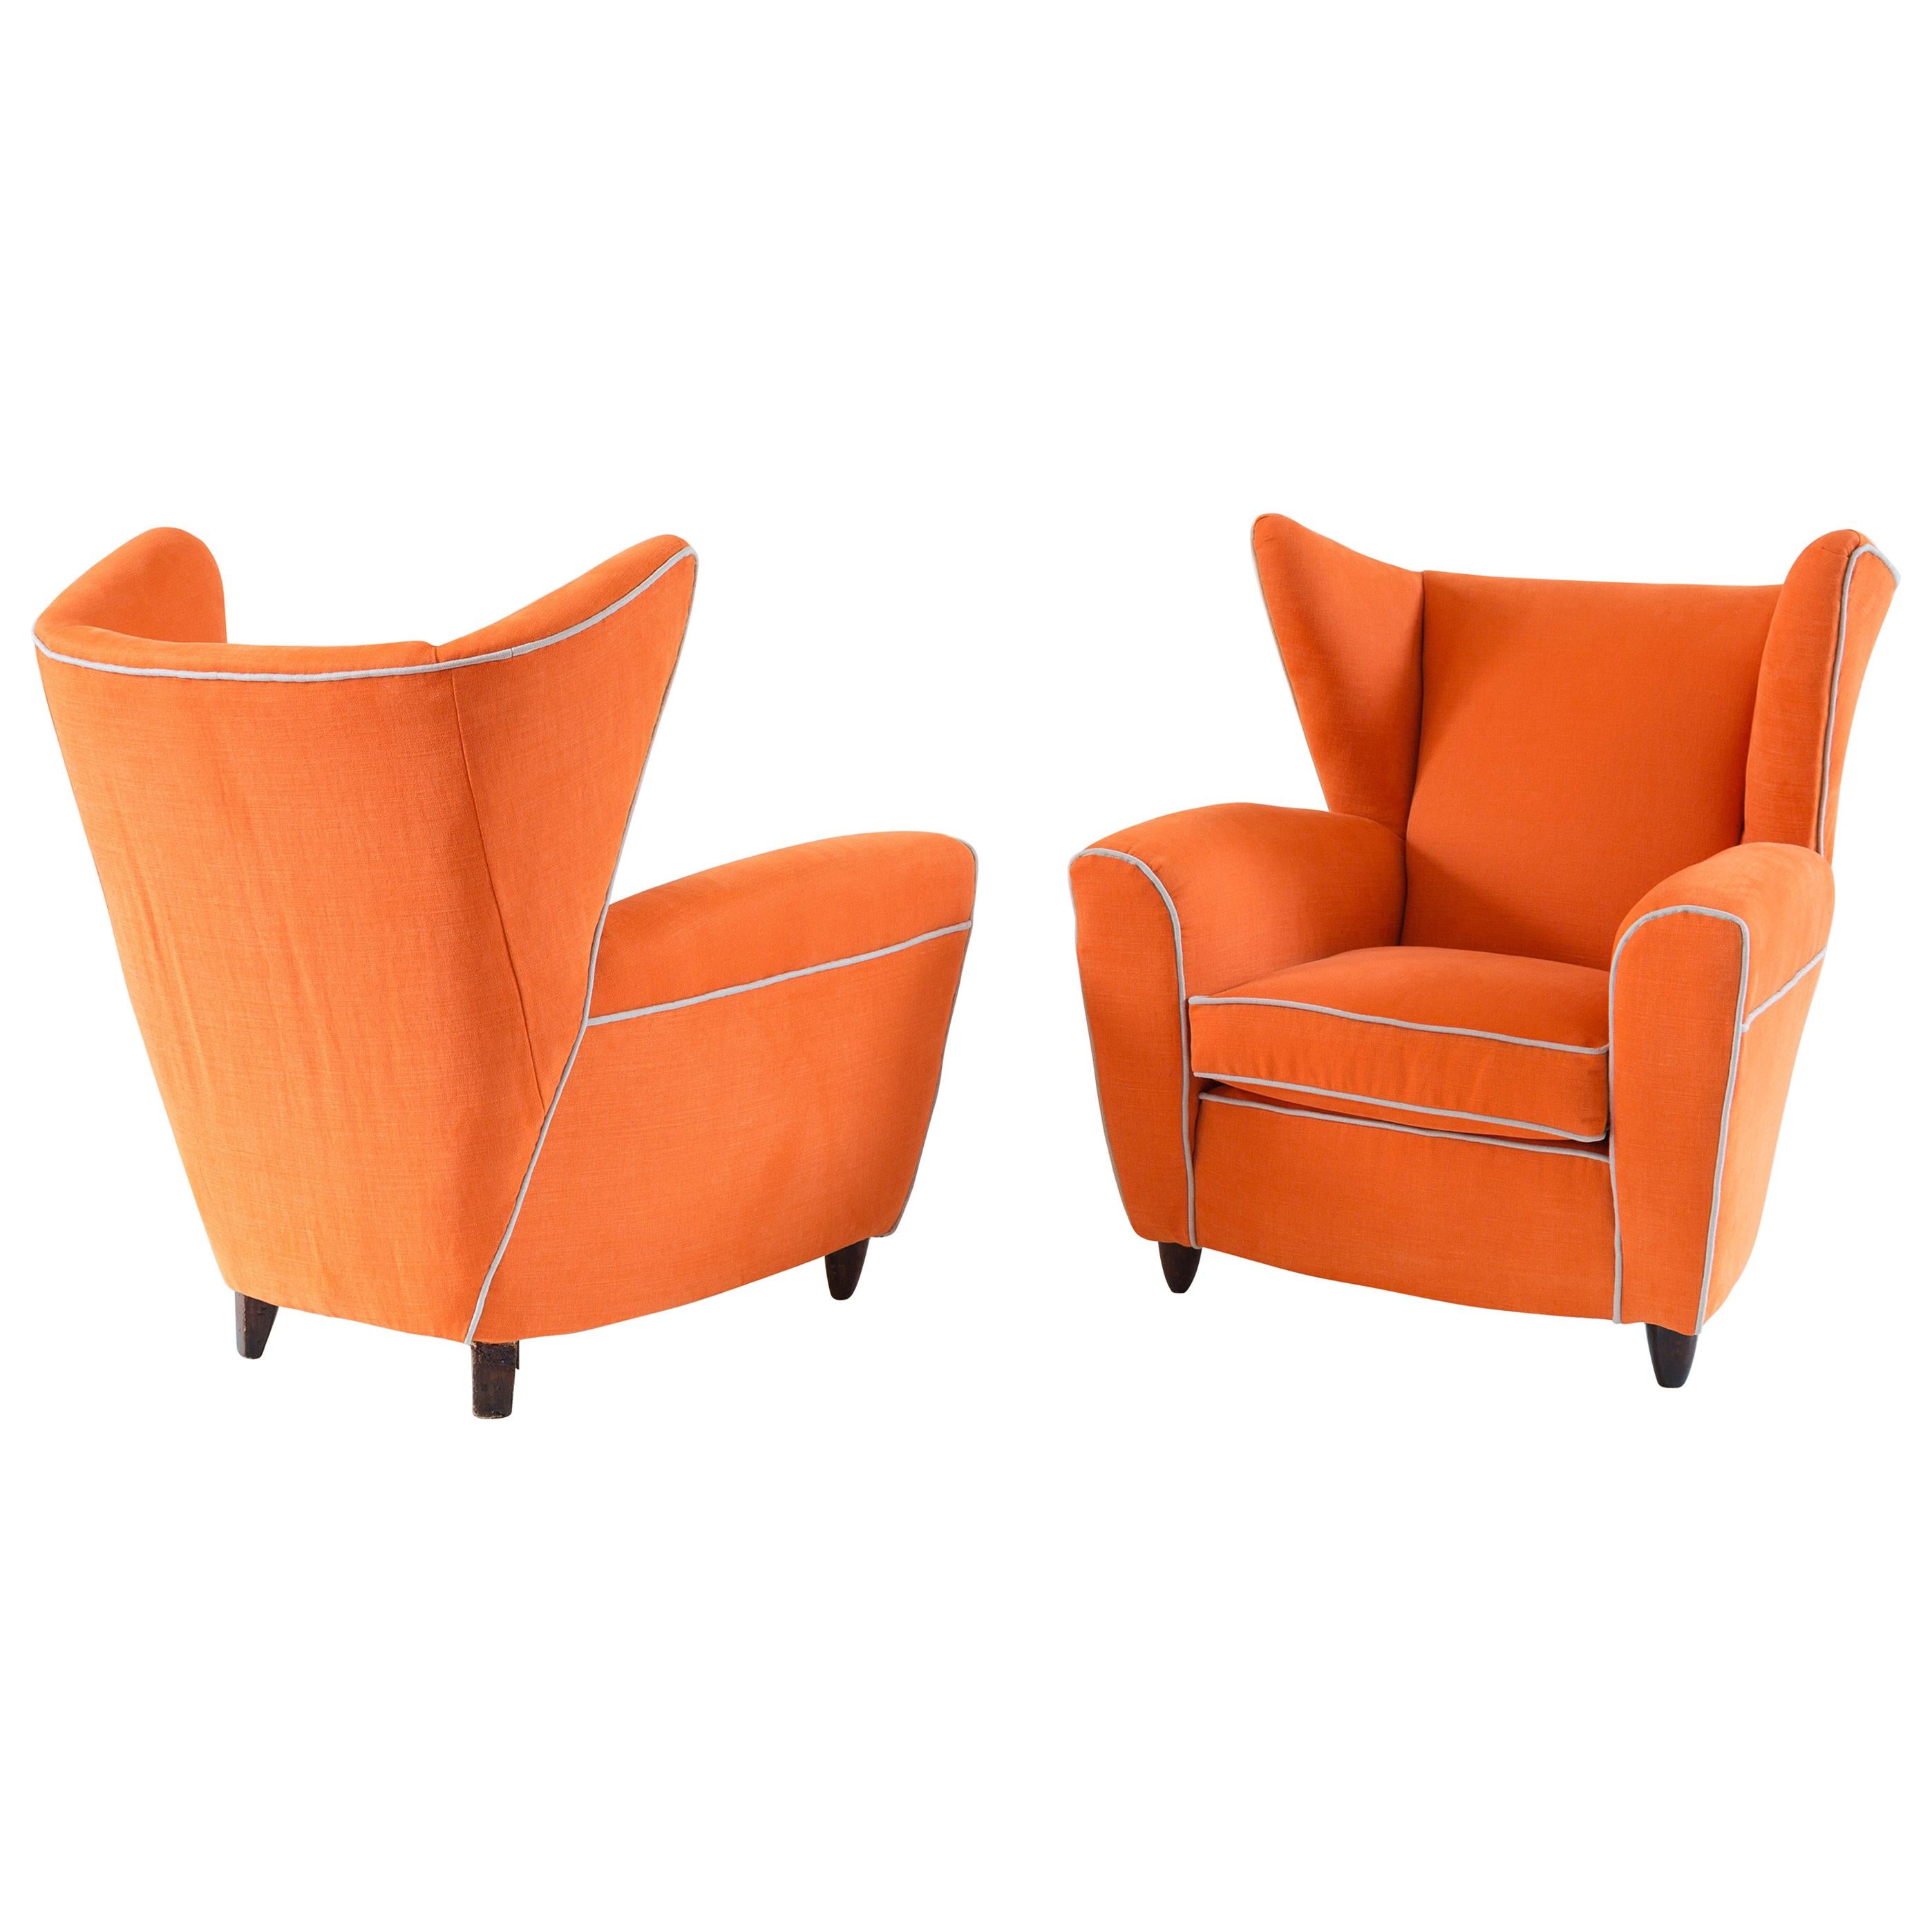 Pair of Large Attributed Melchiorre Bega Wingback Orange Armchairs, 1952